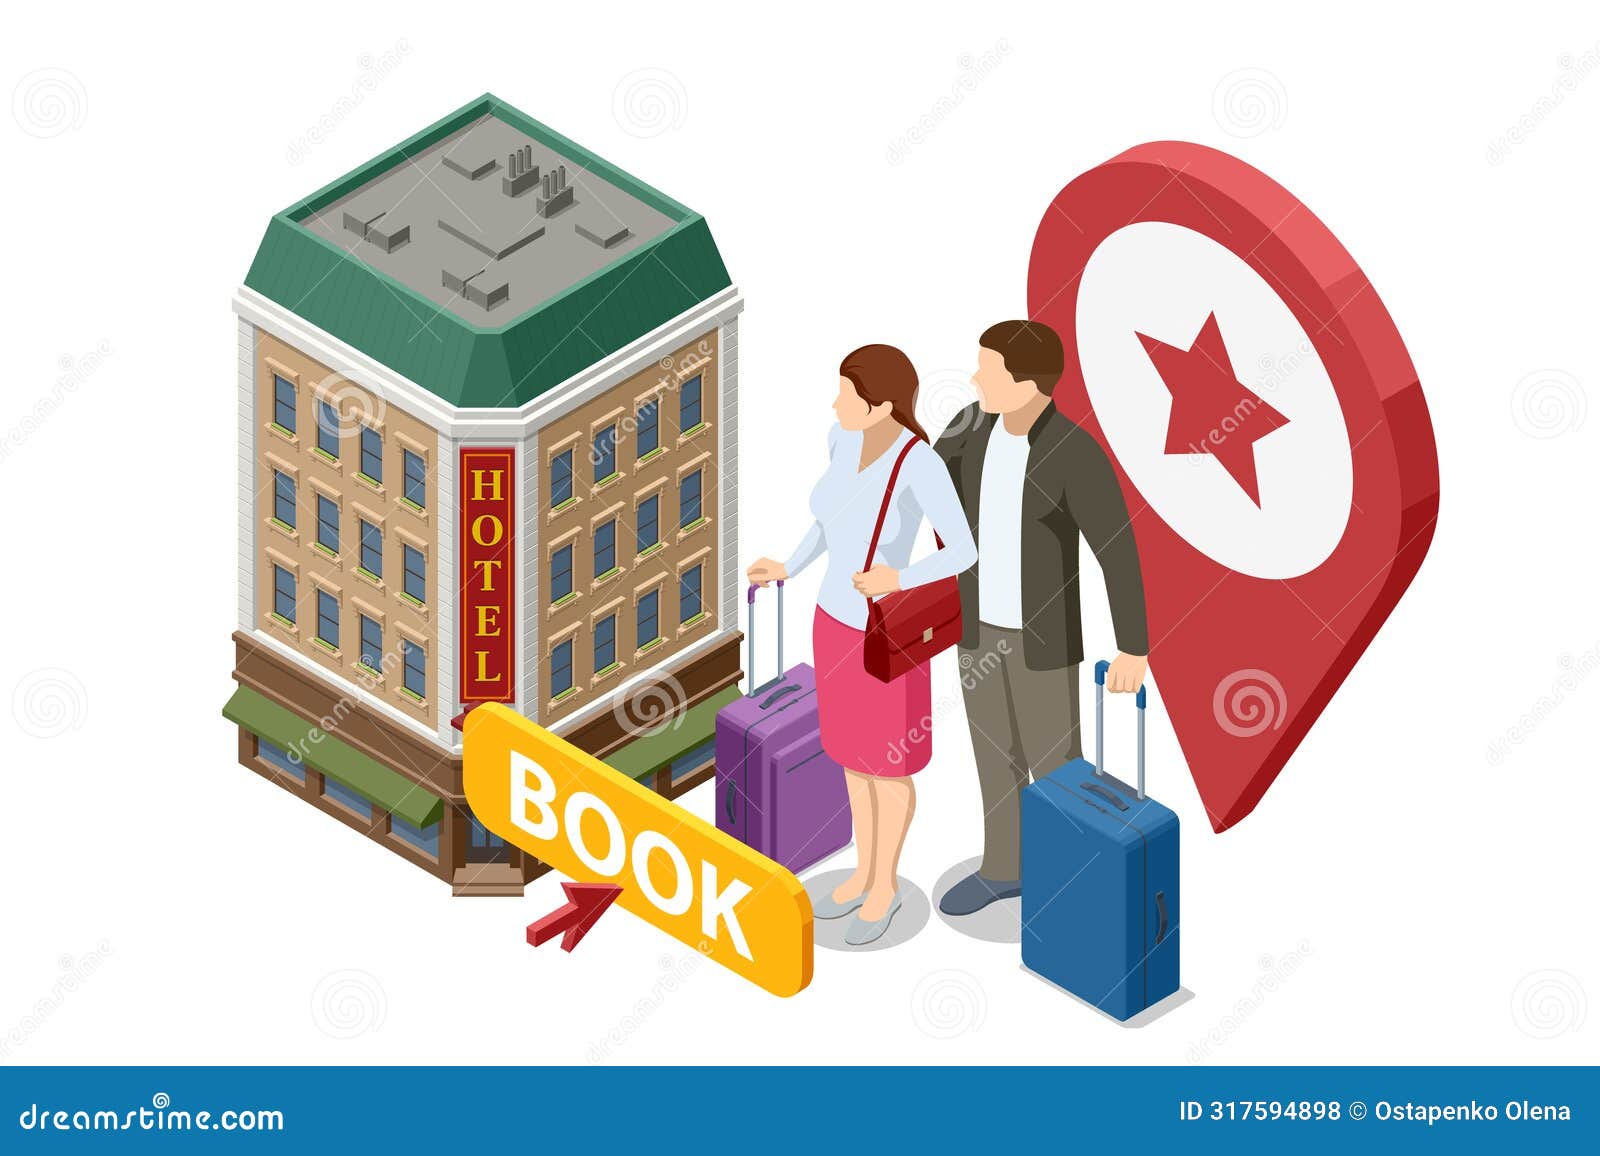 expensive hotel entrance. isometric online hotel booking concept. people booking hotel and search reservation for